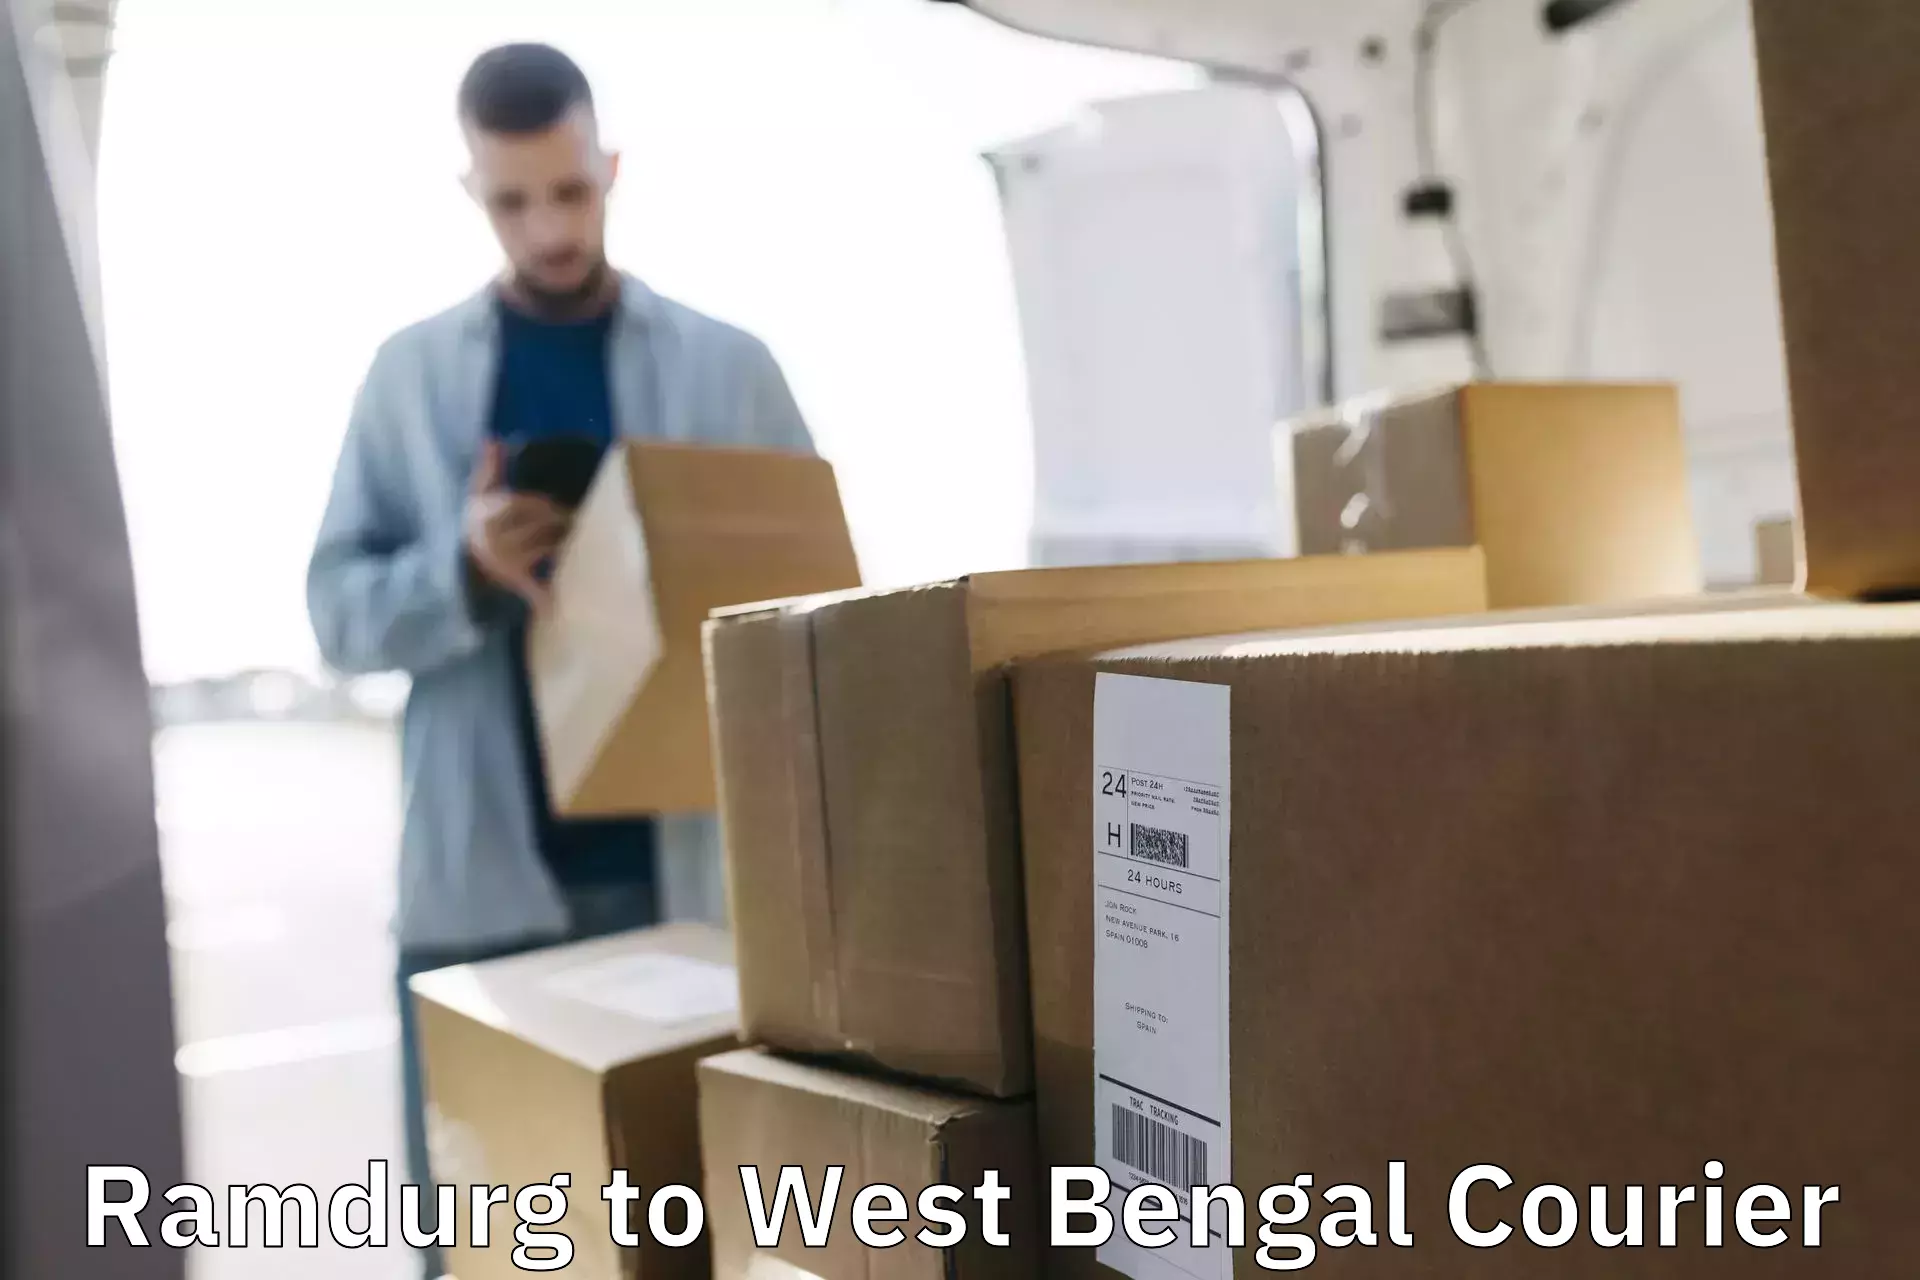 Courier tracking online Ramdurg to West Bengal